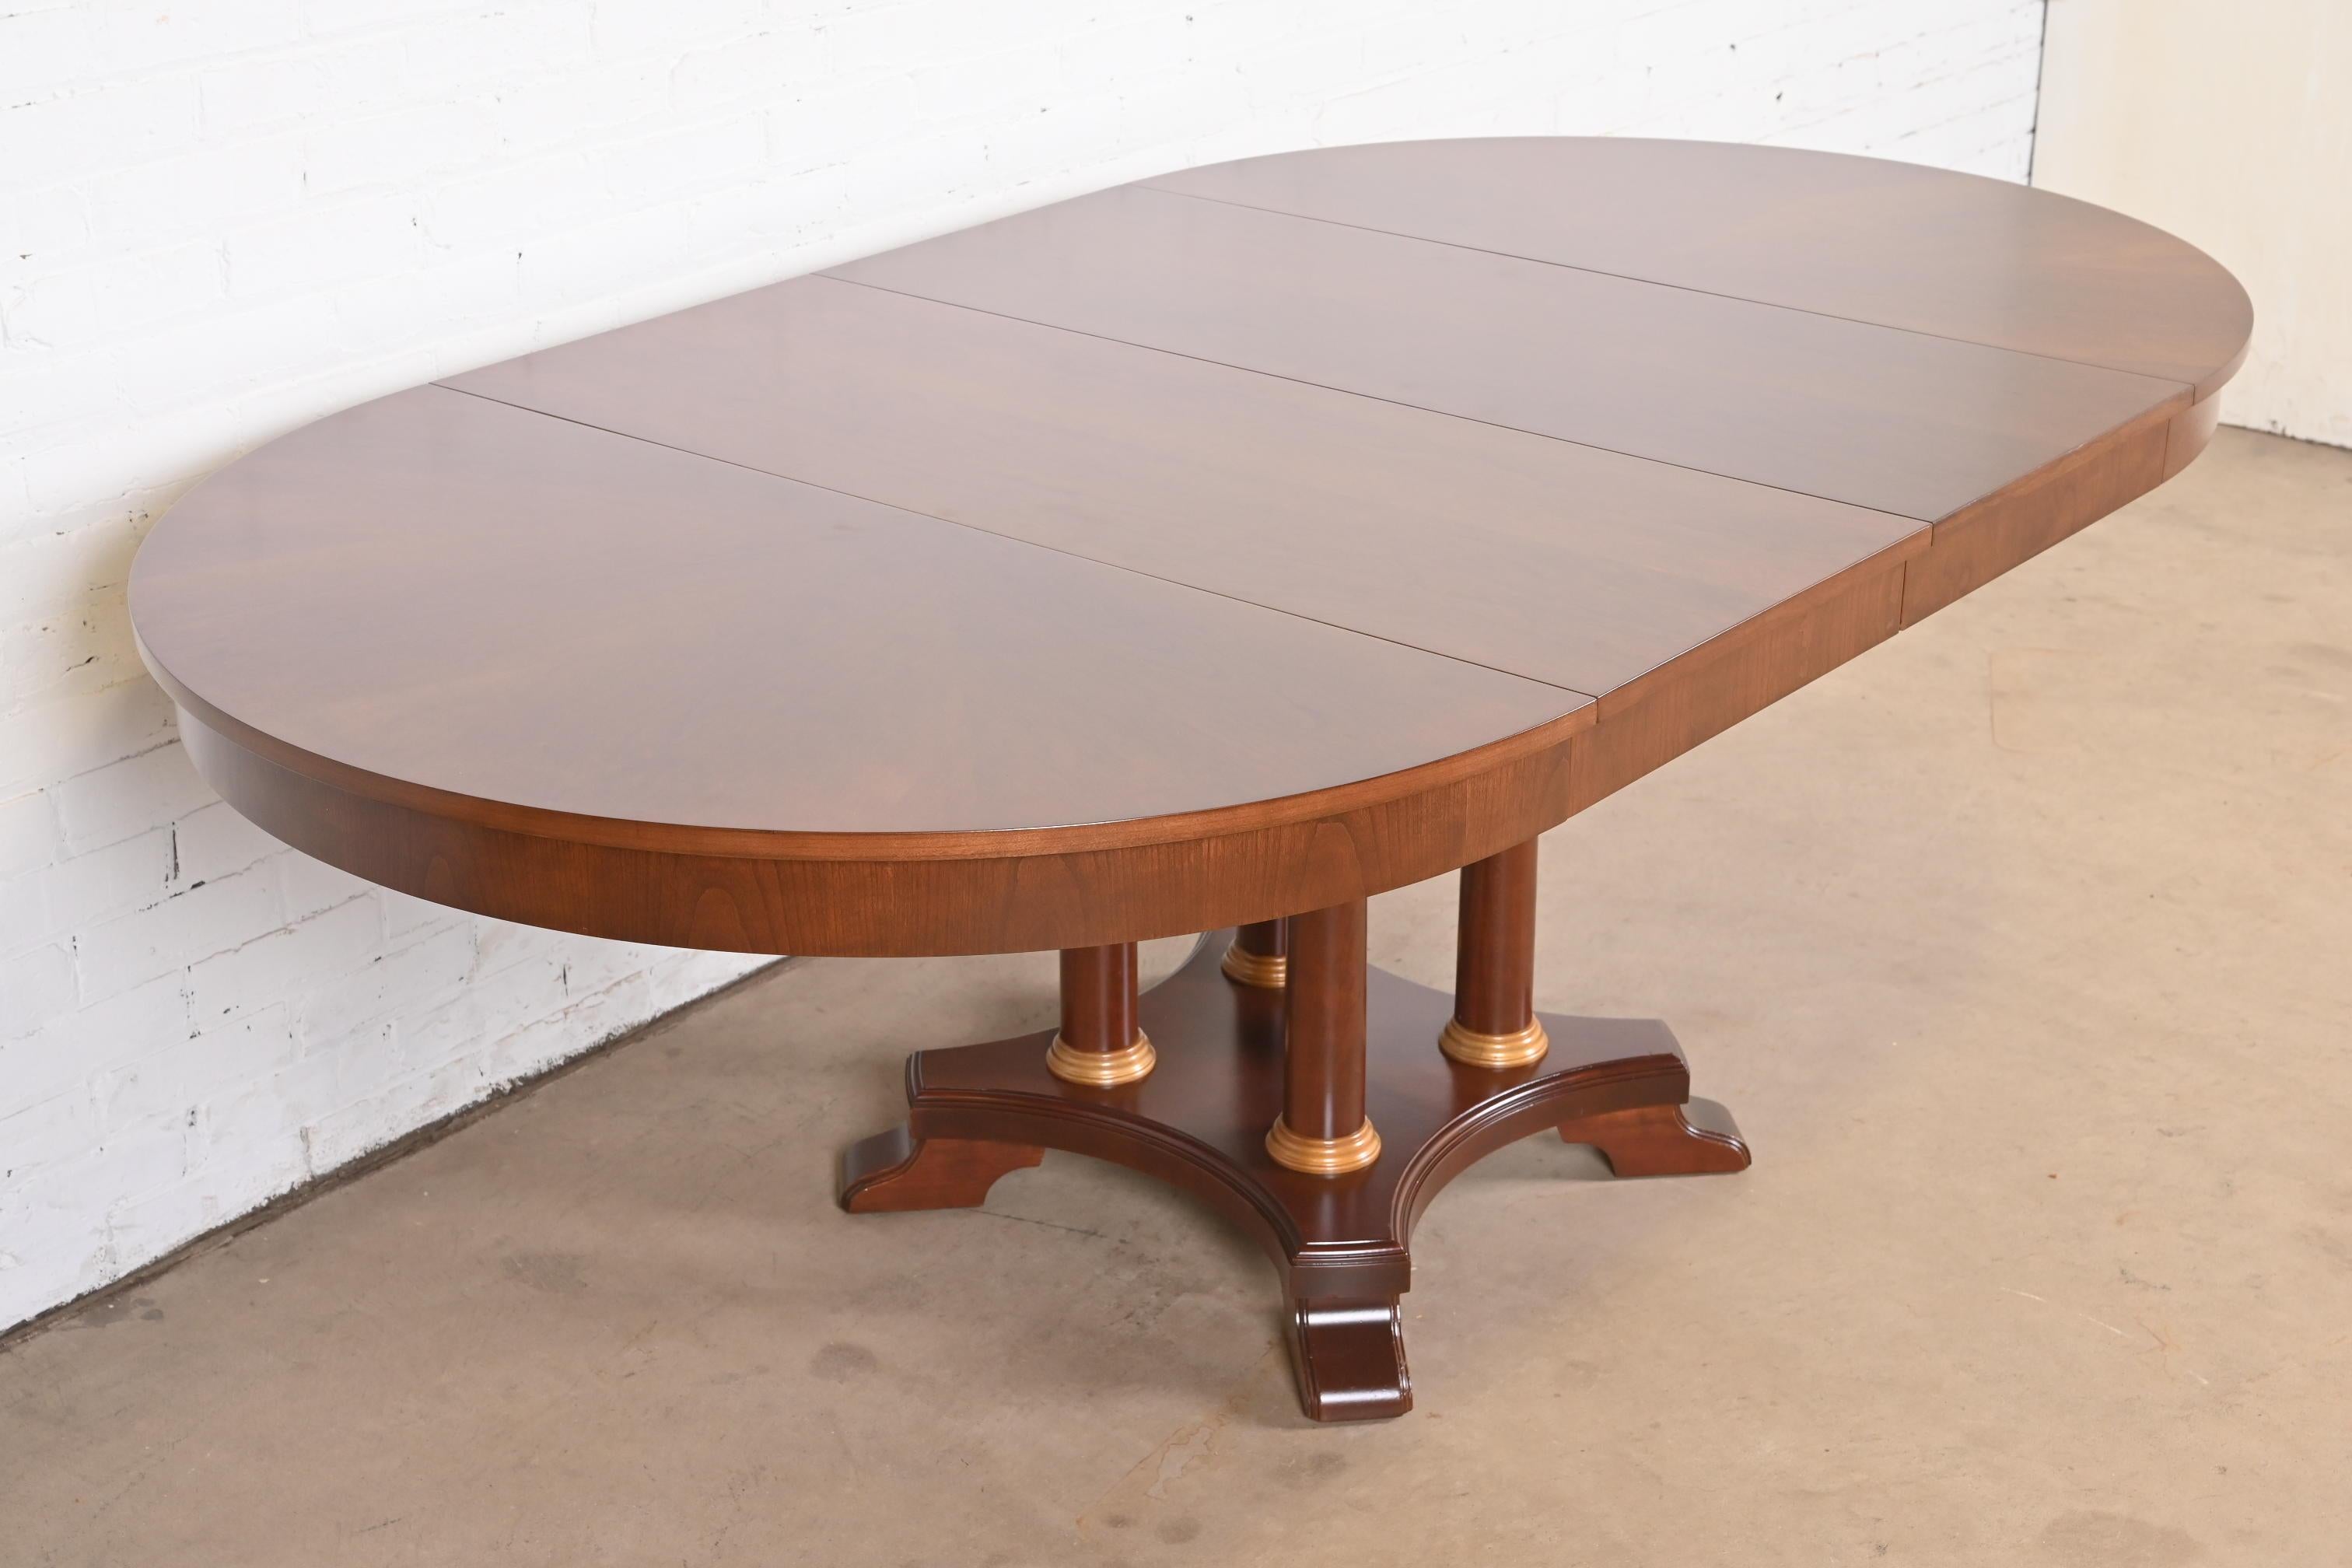 Neoclassical or Empire Cherry Wood Pedestal Dining Table, Newly Refinished For Sale 1